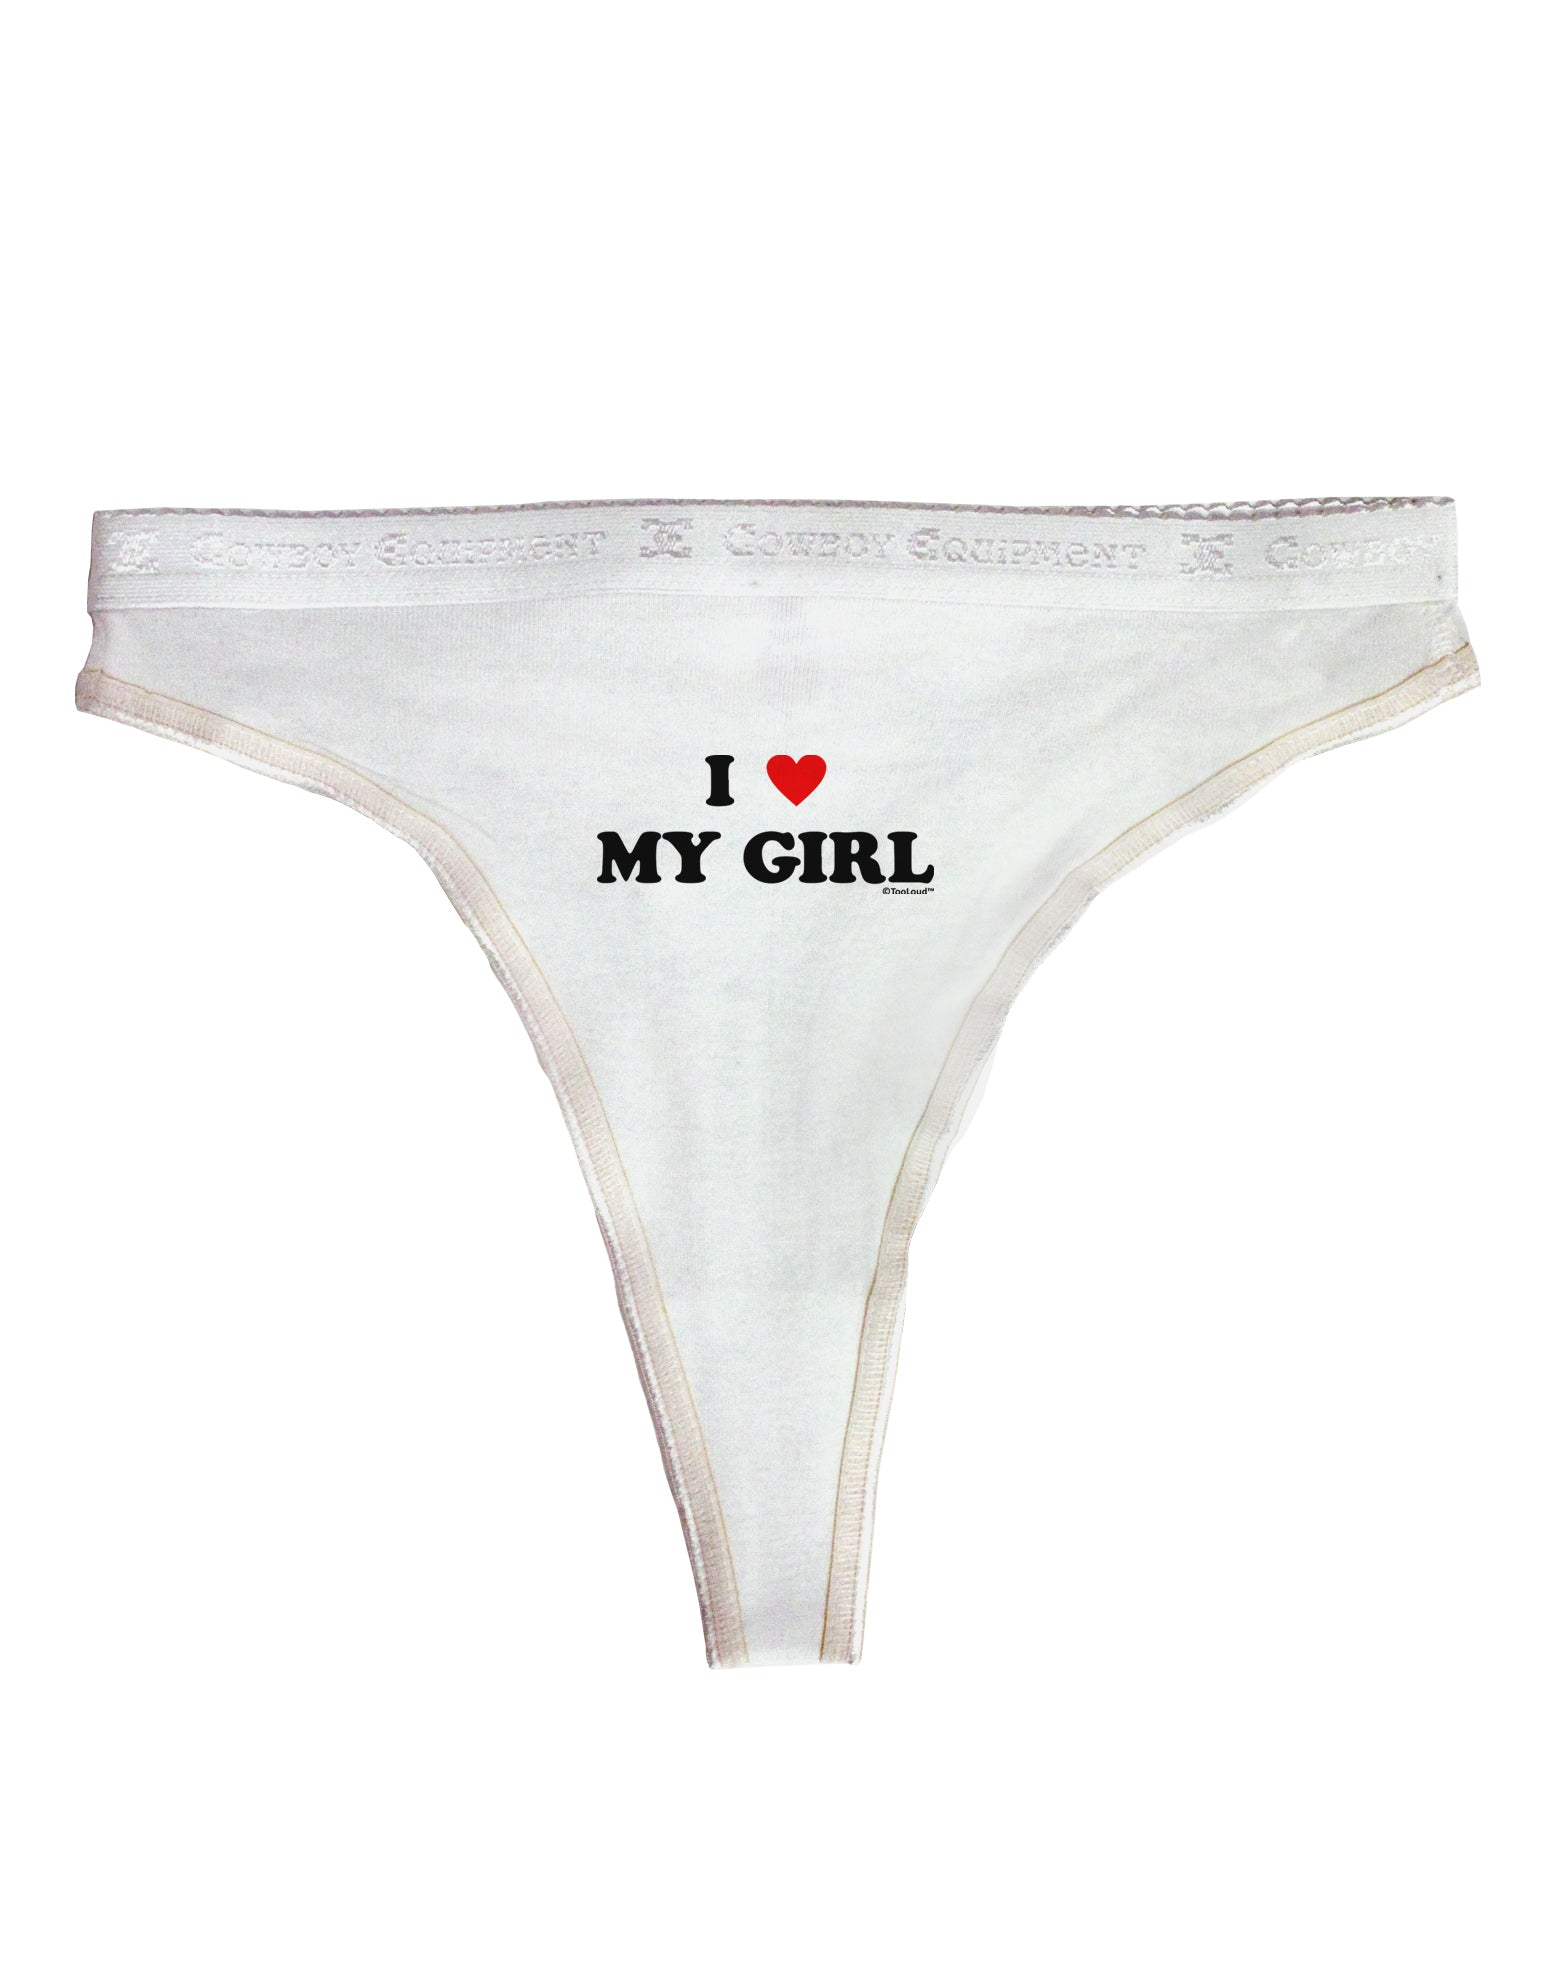 I Heart My Girl - Matching Couples Design Boxer Briefs by TooLoud